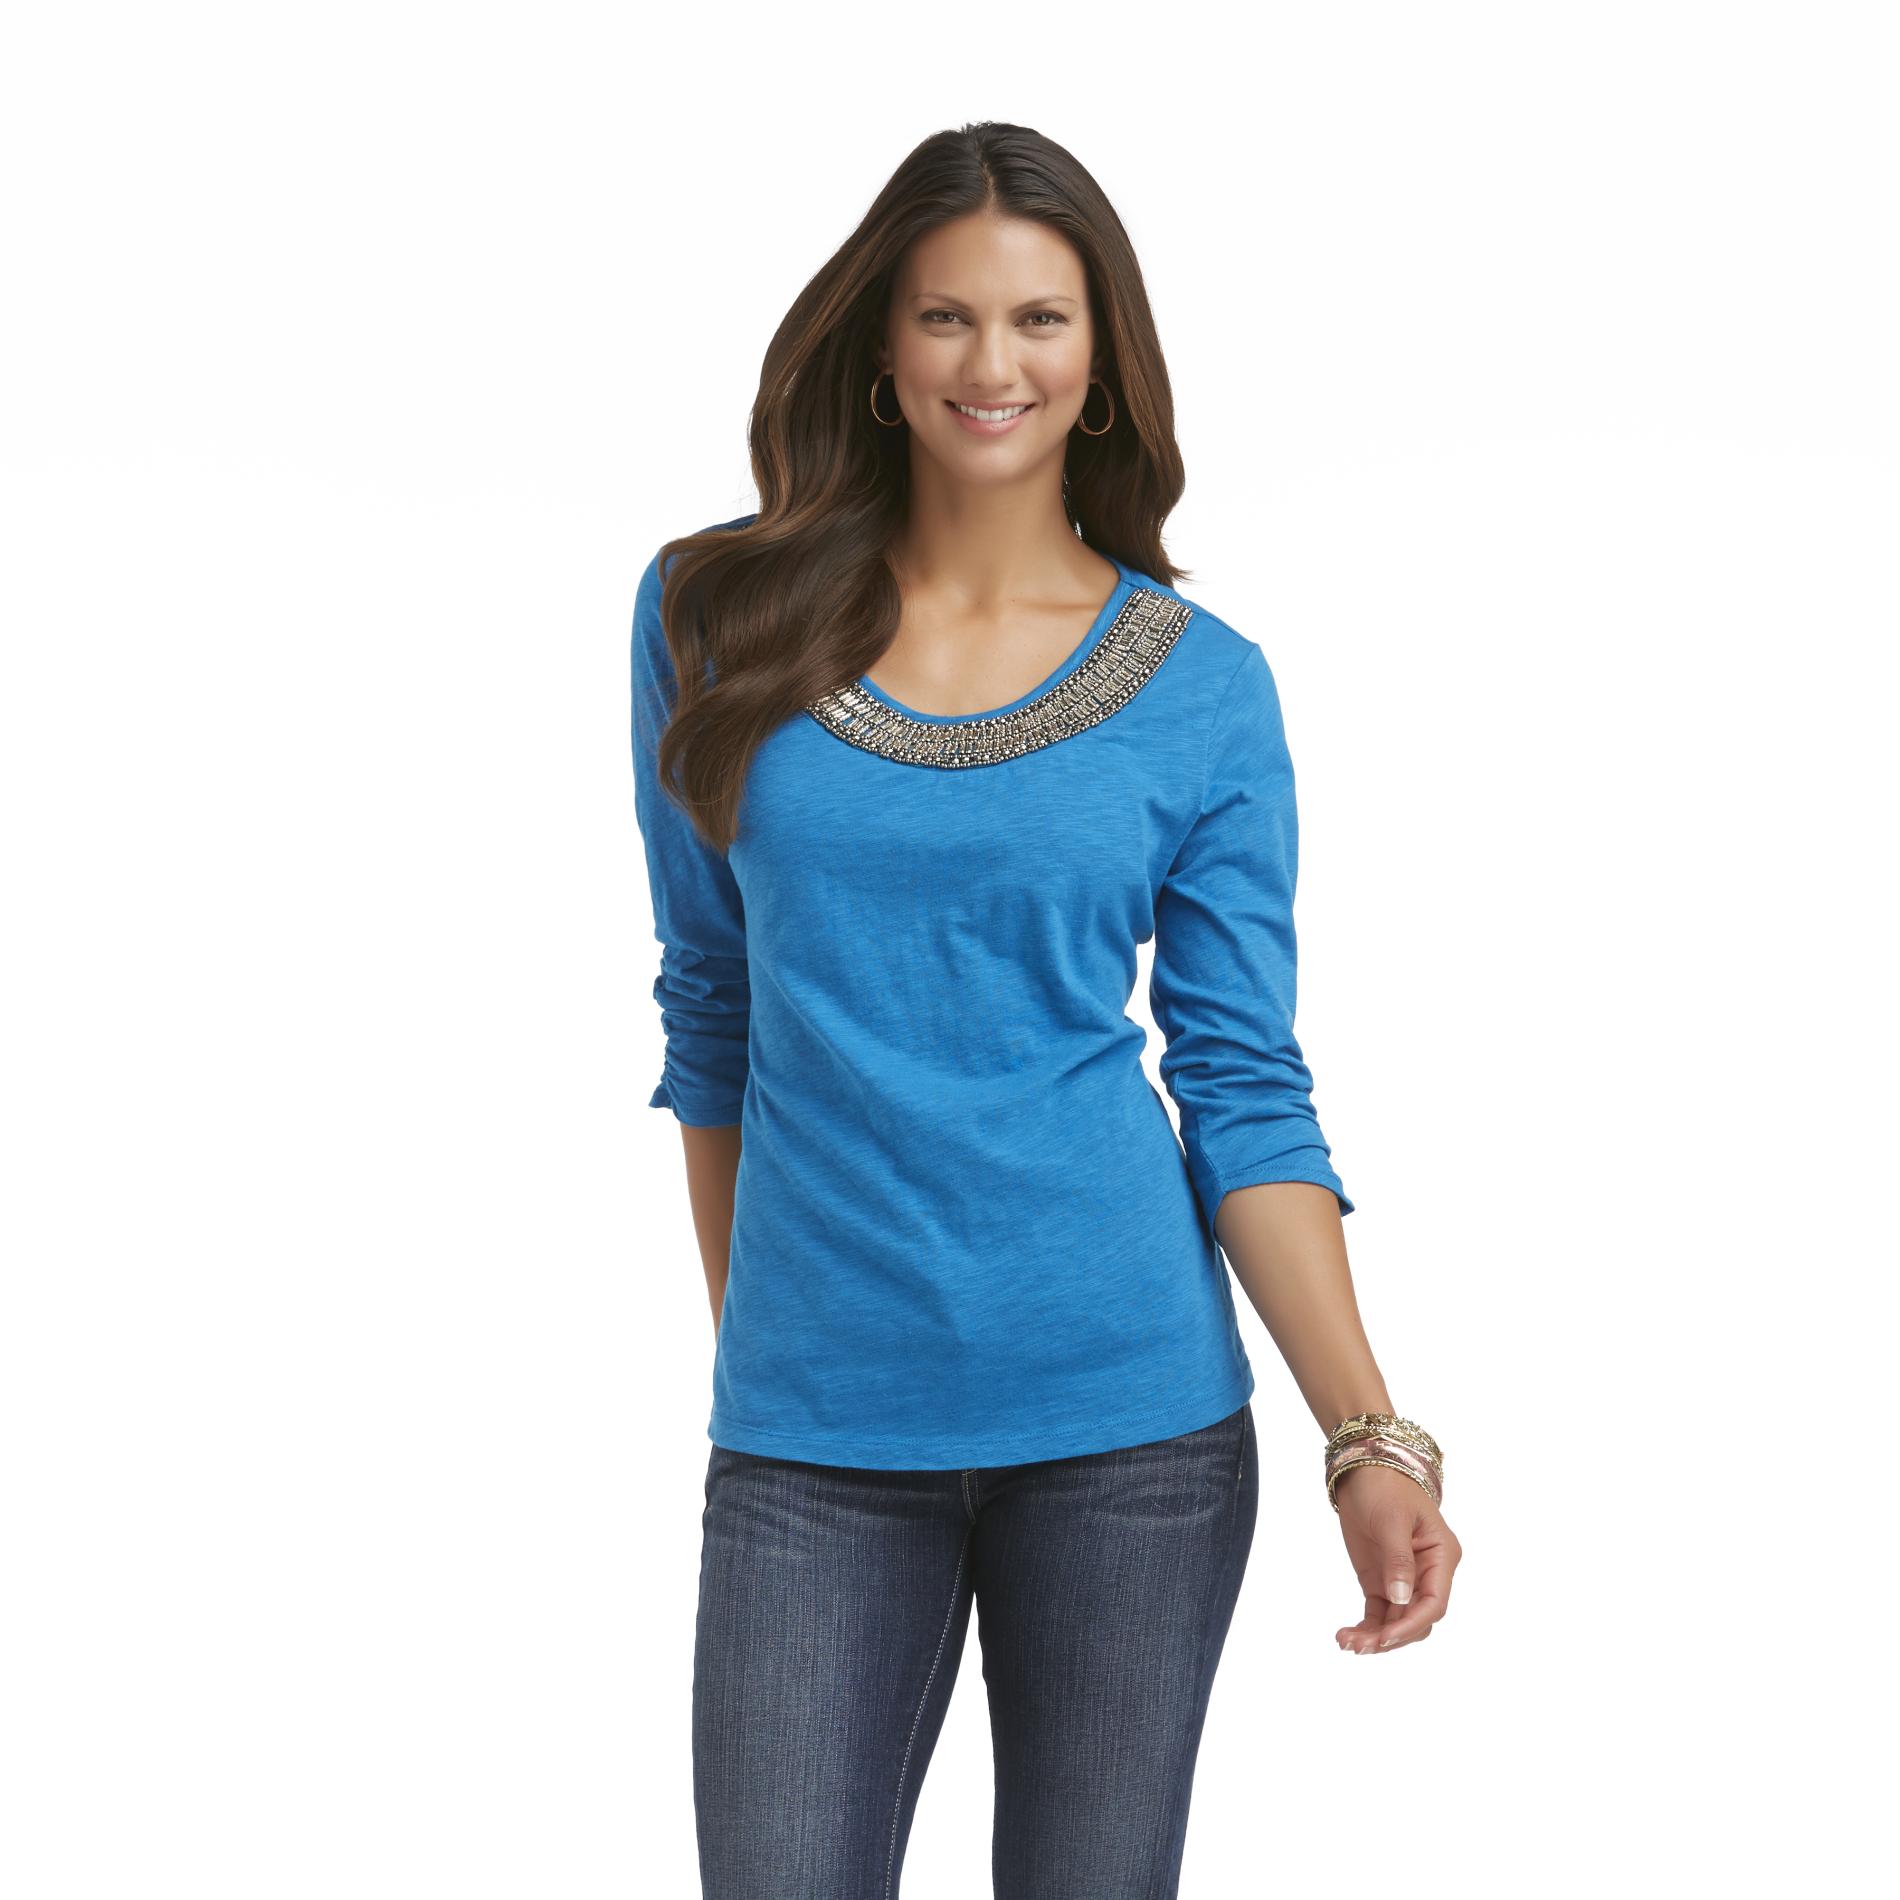 Canyon River Blues Women's Embellished Neckline Top